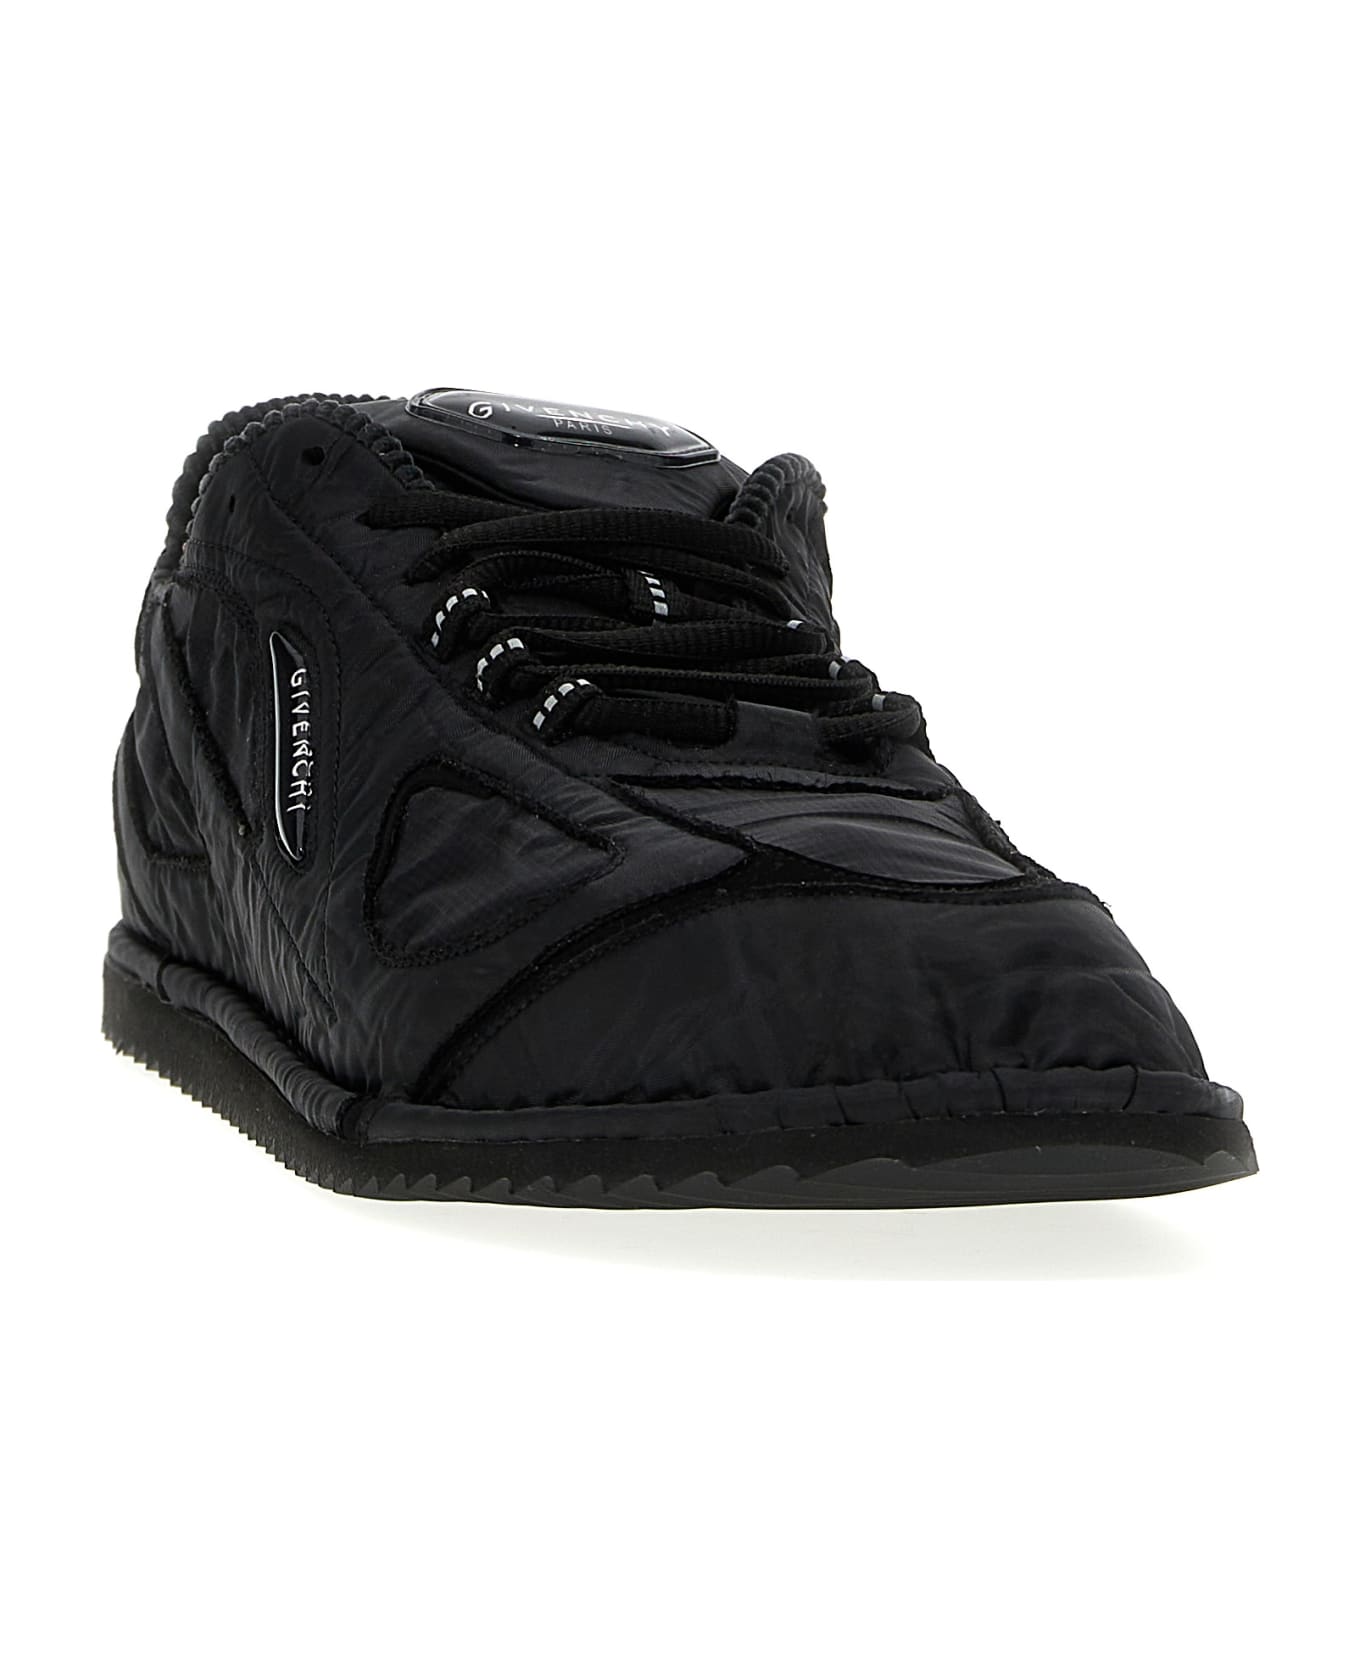 Givenchy 'flat' Sneakers - Black   スニーカー